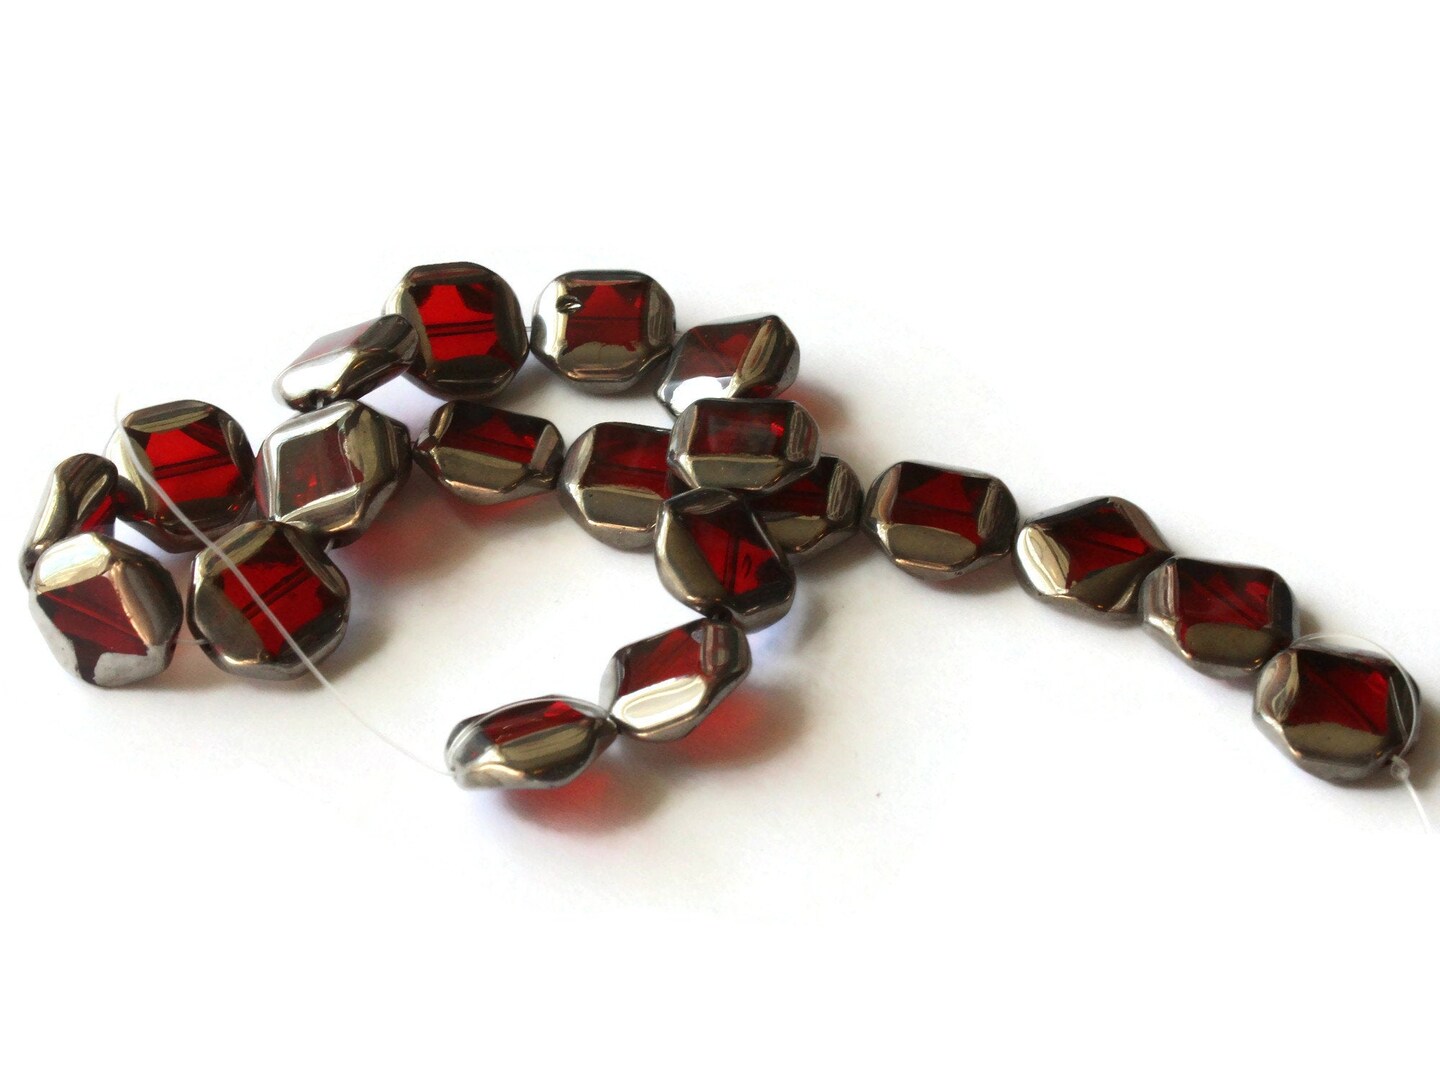 22 14mm Silver Rimmed Glass Red Octagon Window Beads